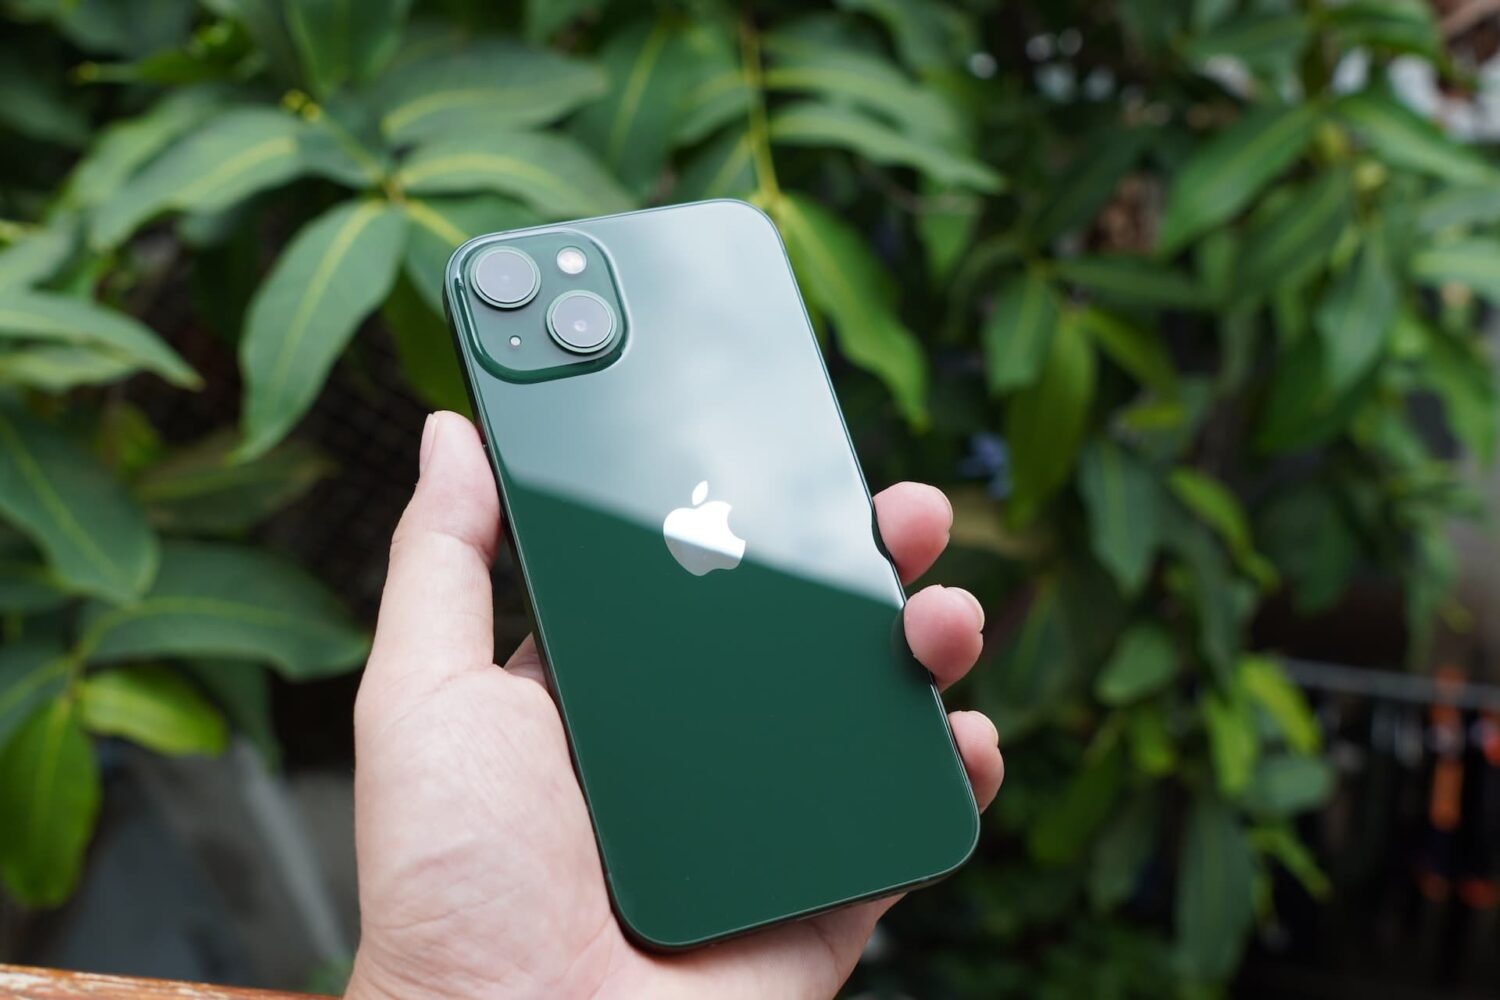 Holding green iPhone 13 in front of green bushes